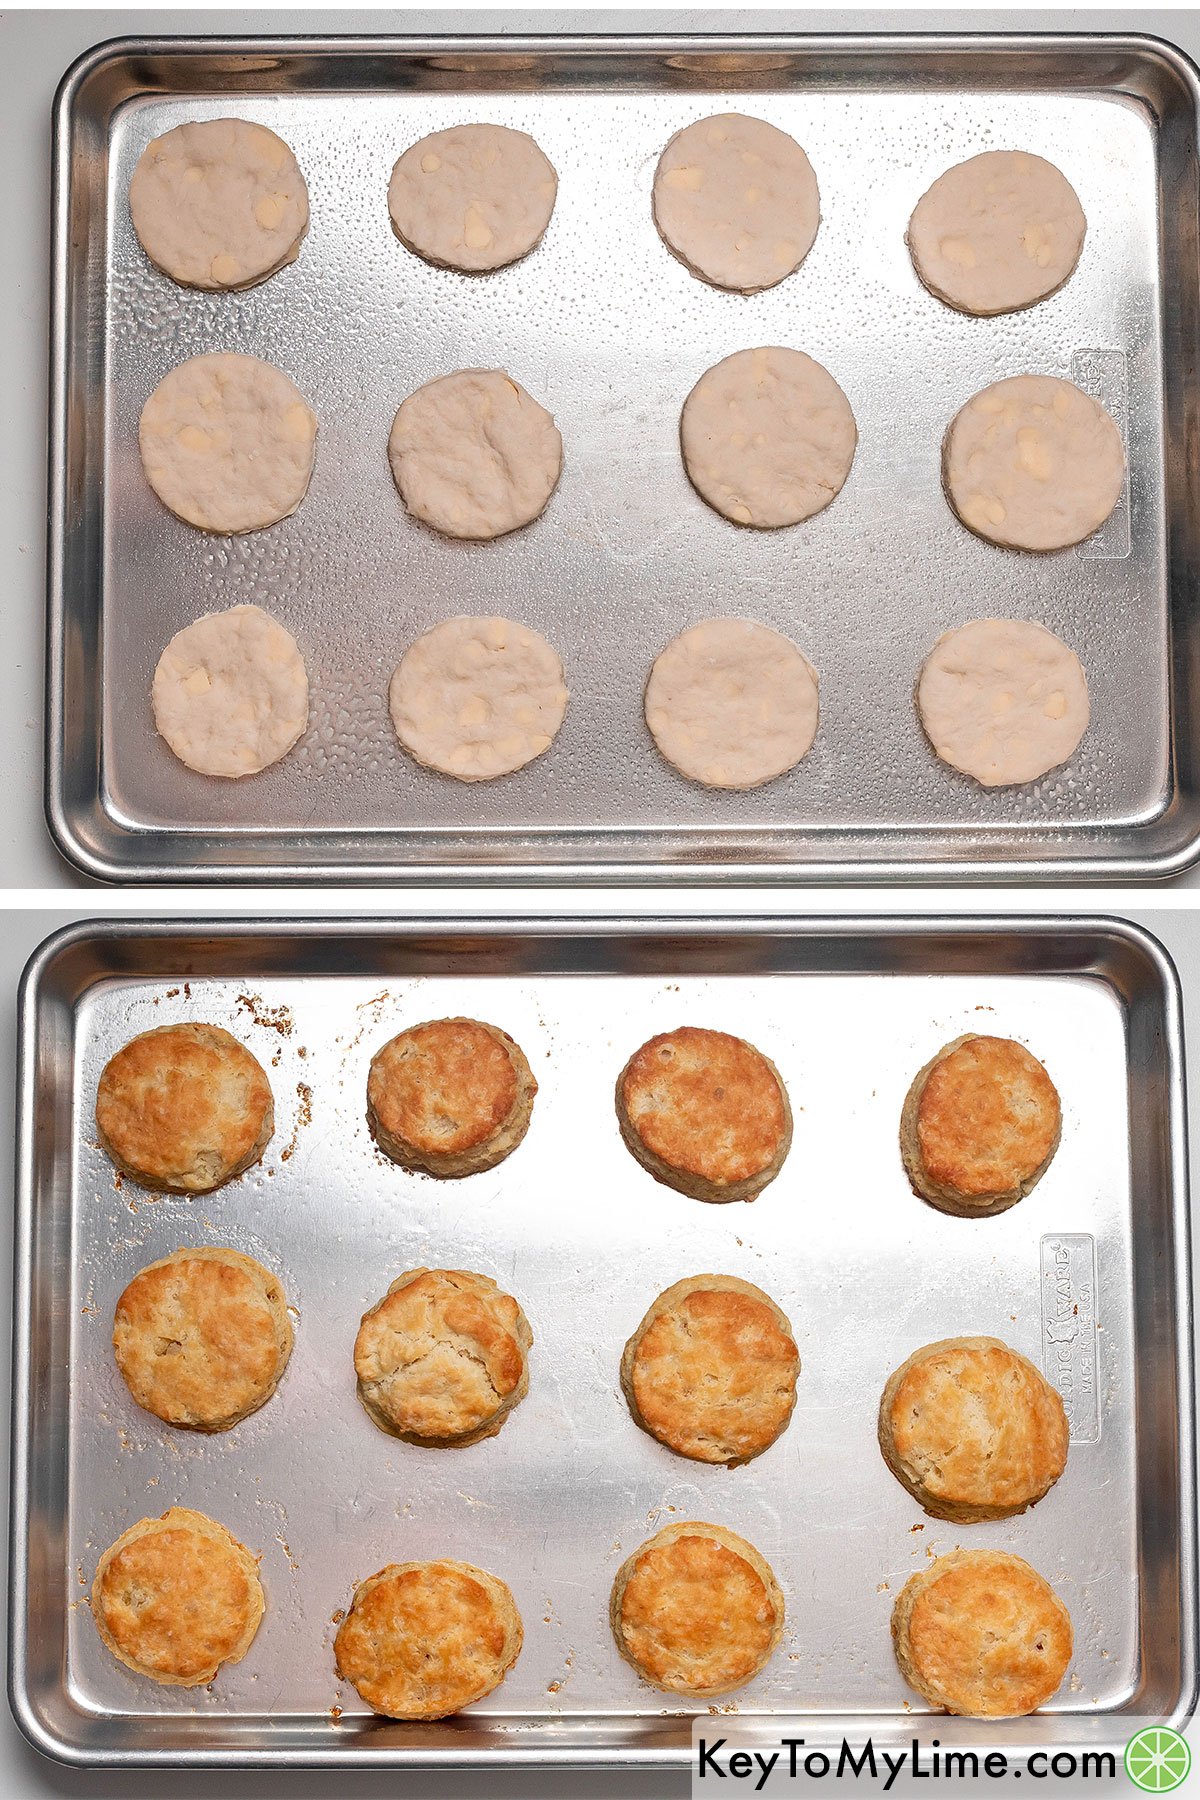 Placing the biscuits on a large rimmed baking sheet and baking in the oven until golden brown.